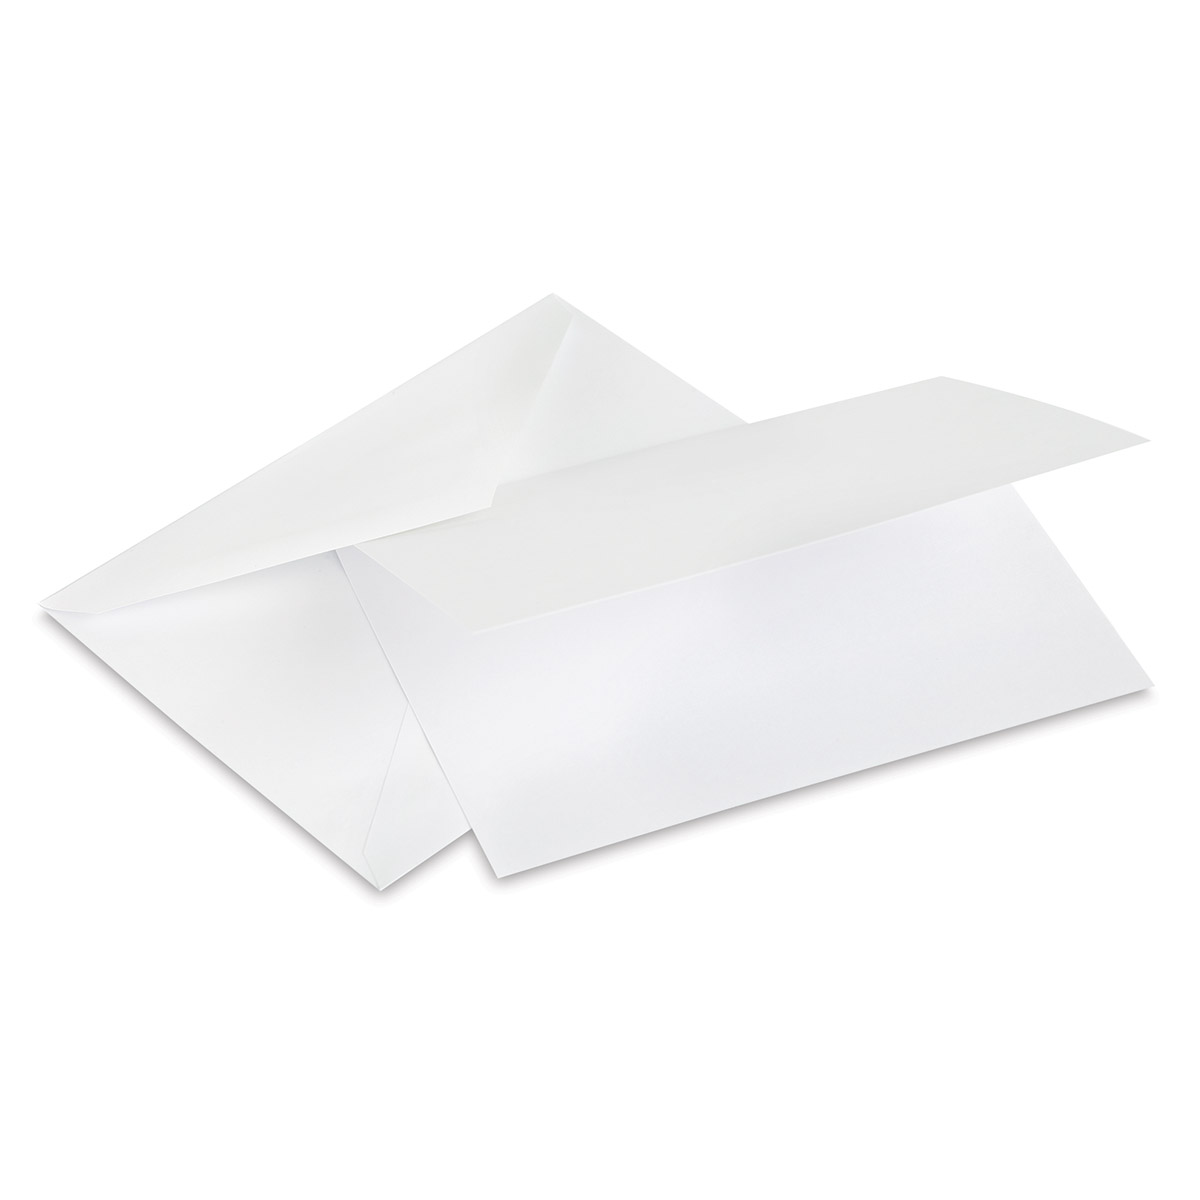 PA Paper Accents Card and Envelope - 4-1/4-inch x 5-1/2-inch - 50